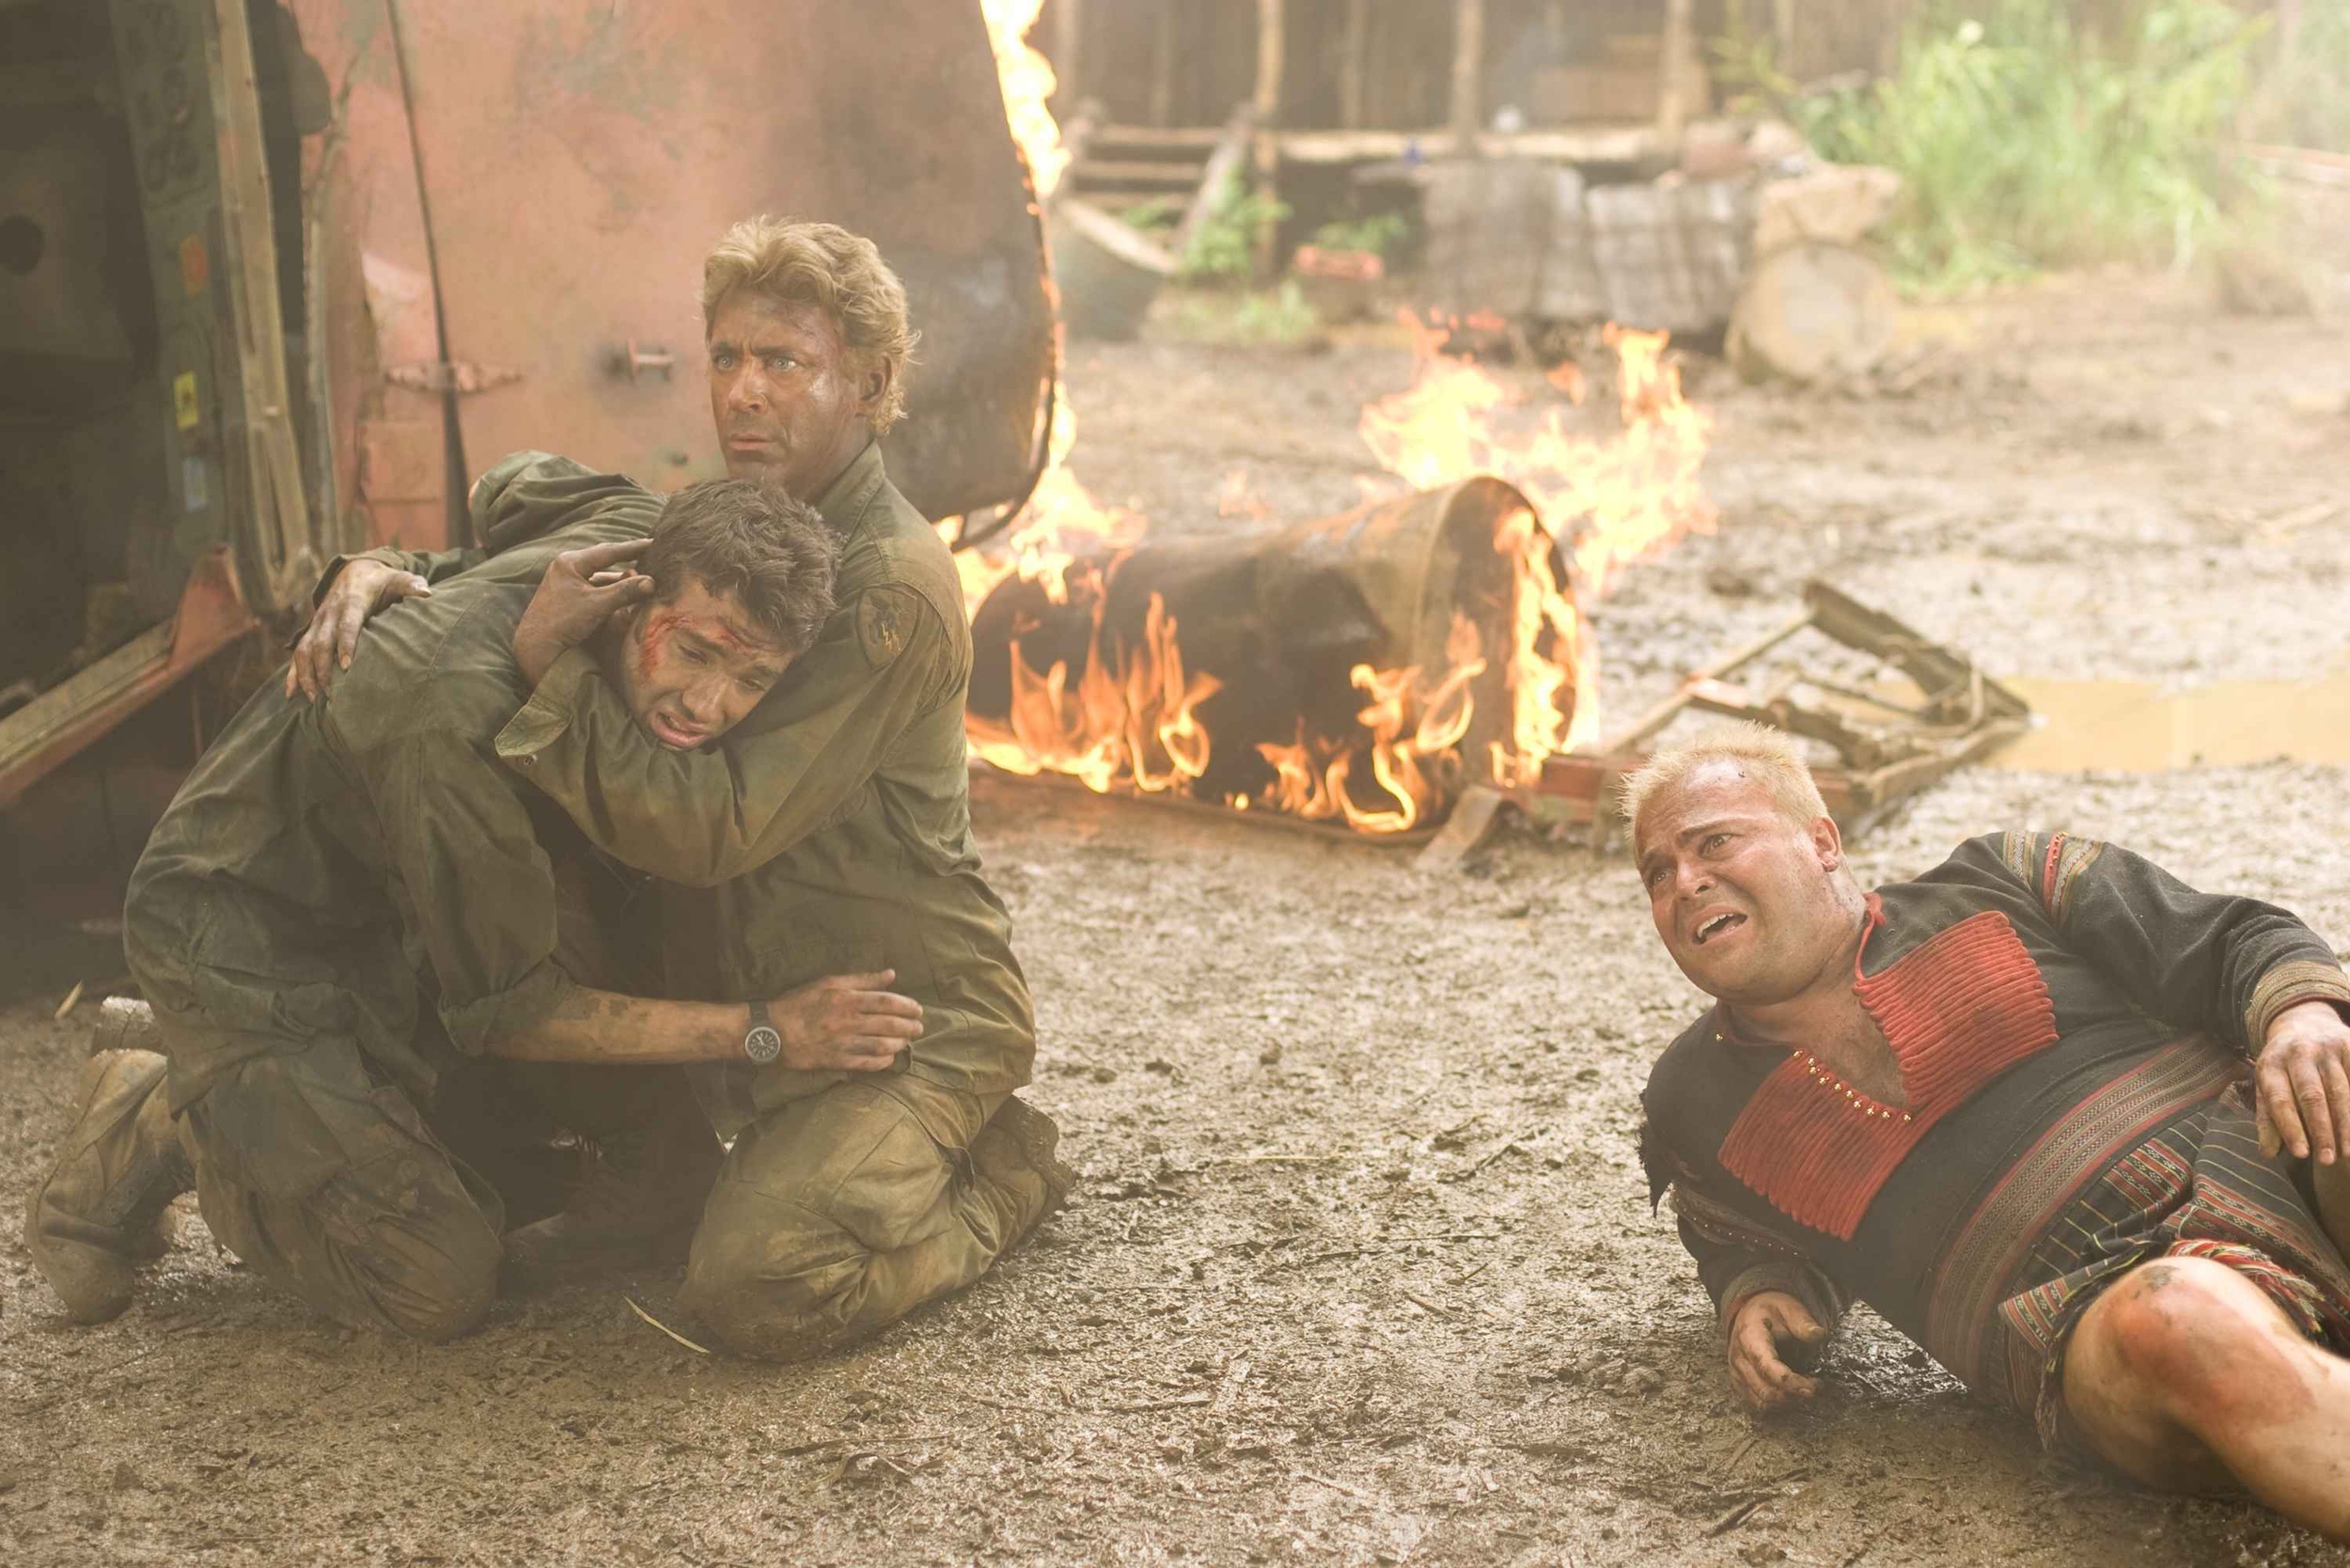 <p>The war movie filmed in <em>Tropic Thunder</em> is quite gory, and the action gets all too real for the actors. However, this is not a movie with a terribly high body count, at least on screen. Two of the on-screen deaths are animals — a panda and a bat. The other is director Damien Cockburn, whose death is admittedly violent but resulted from an accident.</p><p><a href='https://www.msn.com/en-us/community/channel/vid-cj9pqbr0vn9in2b6ddcd8sfgpfq6x6utp44fssrv6mc2gtybw0us'>Follow us on MSN to see more of our exclusive entertainment content.</a></p>